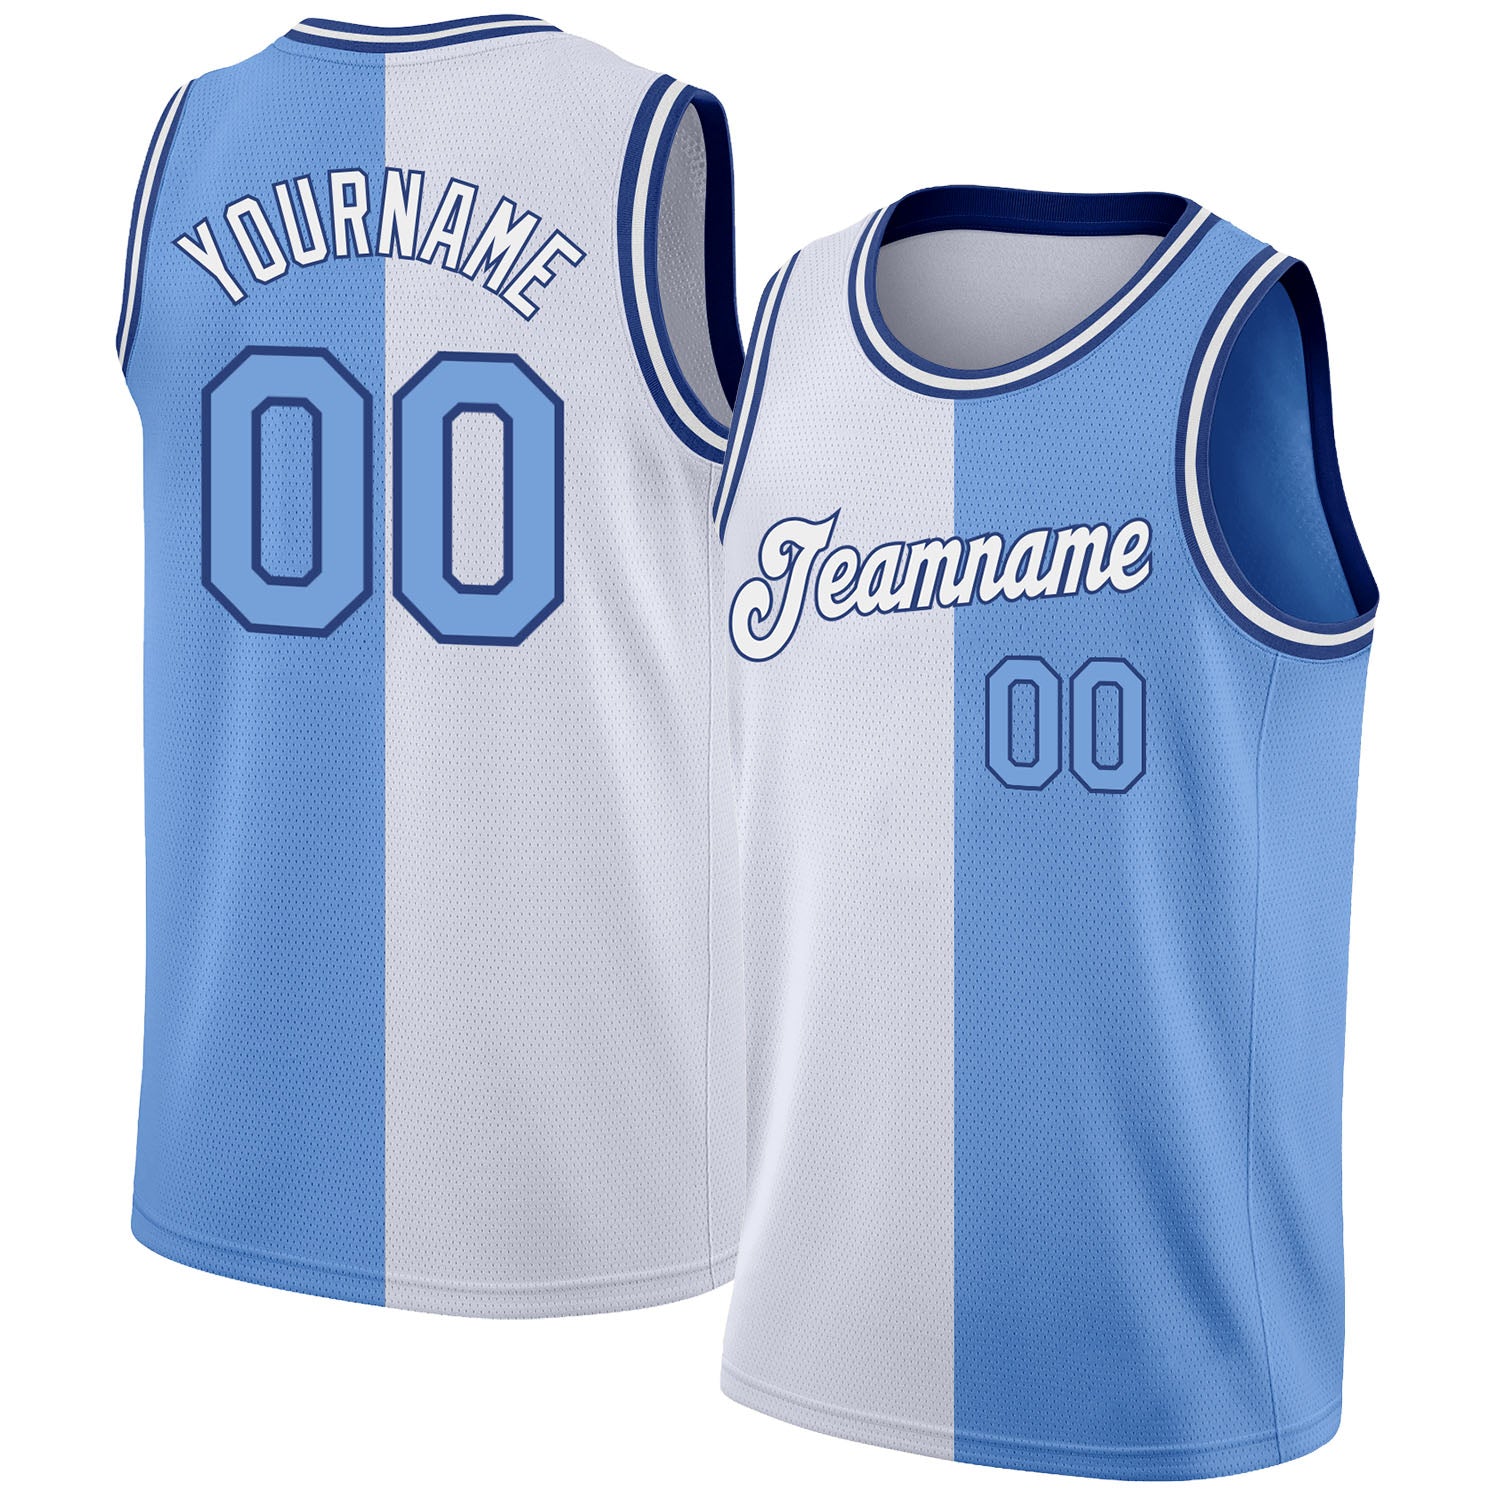 blue and white basketball jersey